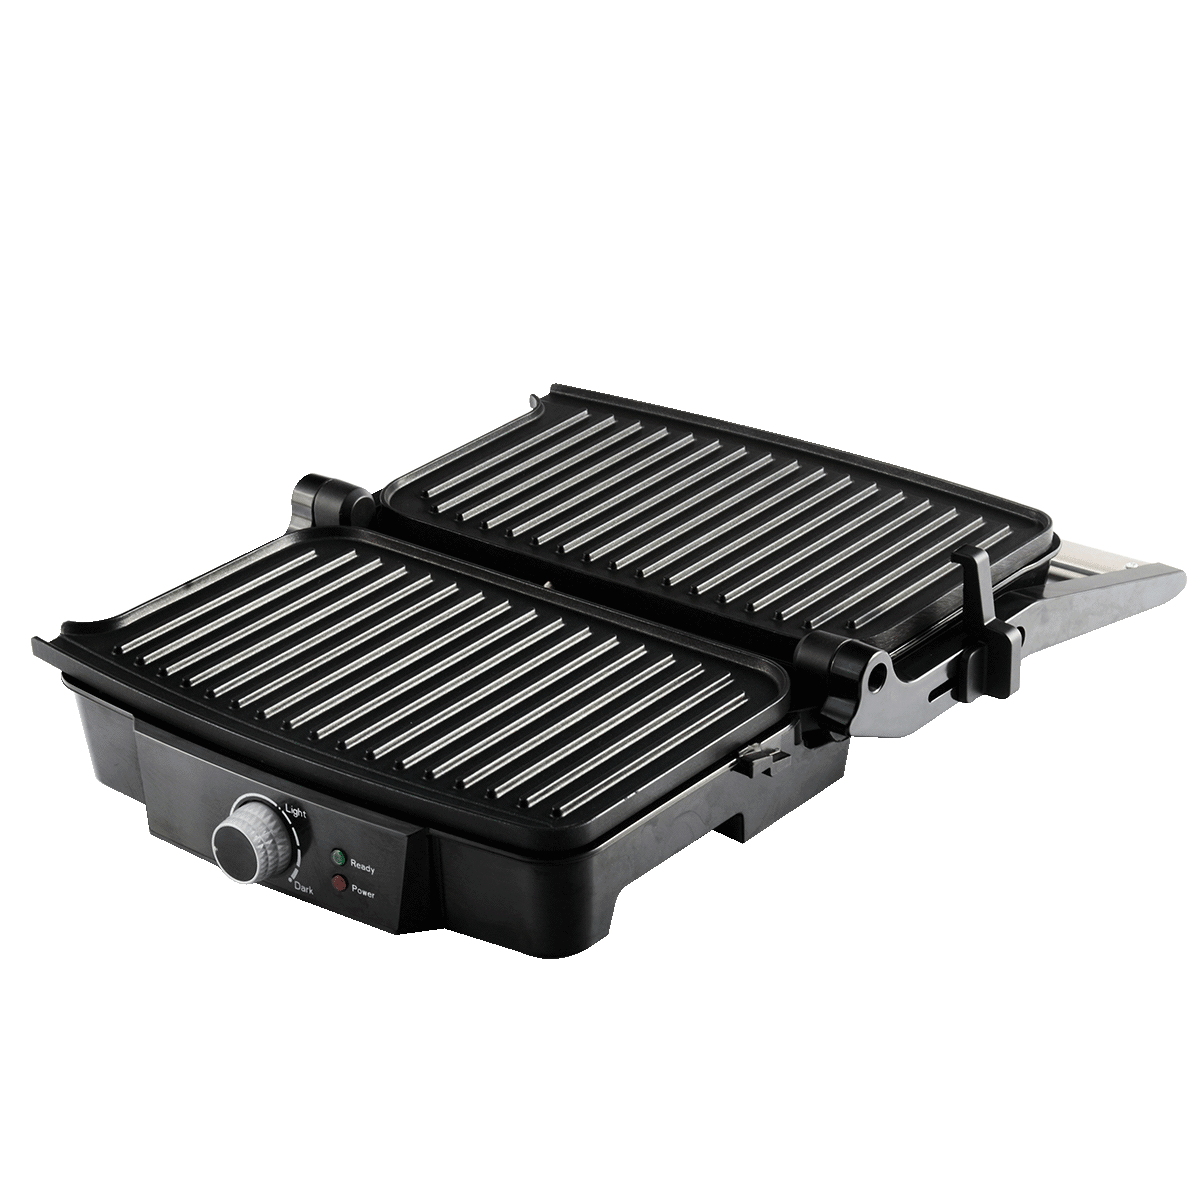 Contact grill KG 160A 